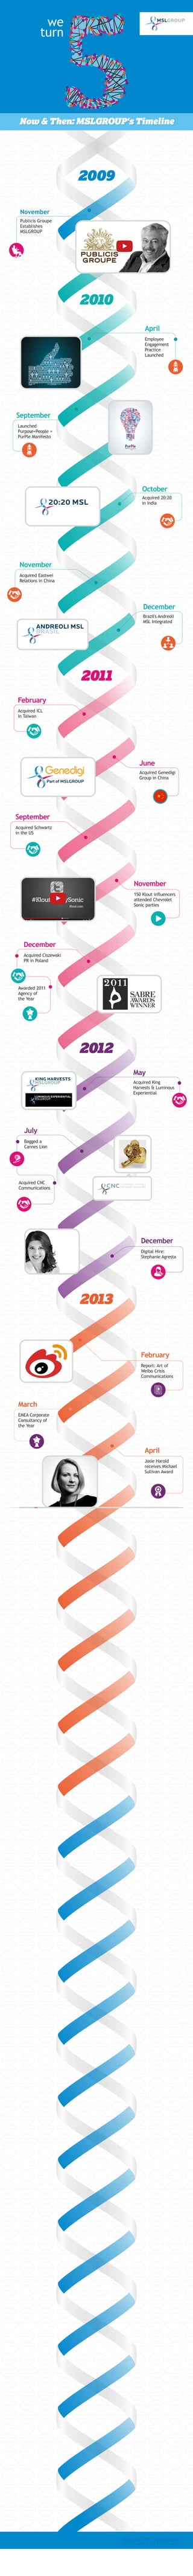 we 
turn 
Now & Then: MSLGROUP's Timeline 
2009 
November 
Publicis Groupe 
Establishes 
MSLGROUP 
2010 
April 
Employee 
Engagement 
Practice 
Launched 
October 
Acquired 20:20 
in India 
December 
Brazil's Andreoli 
MSL Integrated 
November 
Acquired Eastwei 
Relations in China 
2011 
February 
Acquired ICL 
in Taïwan 
June 
Acquired Genedigi 
Group in China 
2012 
July 
Bagged a 
Cannes Lion 
Acquired CNC 
Communications 
November 
150 Klout influencers 
attended Chevrolet 
Sonic parties 
December 
Digital Hire: 
Stephanie Agresta 
+ 
2013 
February 
Report: Art of 
Weibo Crisis 
Communications 
March 
EMEA Corporate 
Consultancy of 
the Year 
April 
Josie Harold 
receives Michael 
Sullivan Award 
June 
Asia PR Network 
of the Year 
August 
Acquired Espalhe, 
Top Digital Agency 
in Brazil 
December 
LGBT Equality: 
Awarded Best 
Agency To Work 
November 
Launched a 
Guide to Vine 
2014 
February 
Renee Wilson 
named President 
of Cannes PR Jury 
+ 
August 
October 
LiveCOM 
Slovenia Joins 
January 
Acquired Qorvis: 
A New Powerhouse 
in Washington 
July 
Acquired 
Sustainability 
Consultancy 
Salterbaxter 
Digital Hire: 
James Warren 
April 
Created a Hoax 
with Purpose: 
The Miracle Machine 
March 
Report: The 
Millennial Compass 
Digital Hire: 
Tara Hunt 
+ 
September 
The Practice in 
Romania Joins 
Won 17 Stevie 
Awards 
September 
Launched 
Purpose+People = 
PurPle Manifesto 
September 
Acquired Schwartz 
in the US 
December 
Acquired Ciszewski 
PR in Poland 
Awarded 2011 
Agency of 
the Year 
May 
Acquired King 
Harvests & Luminous 
Experiential 
November 
MSLGROUP 
Turns 5 
#MSLTURNS5 
